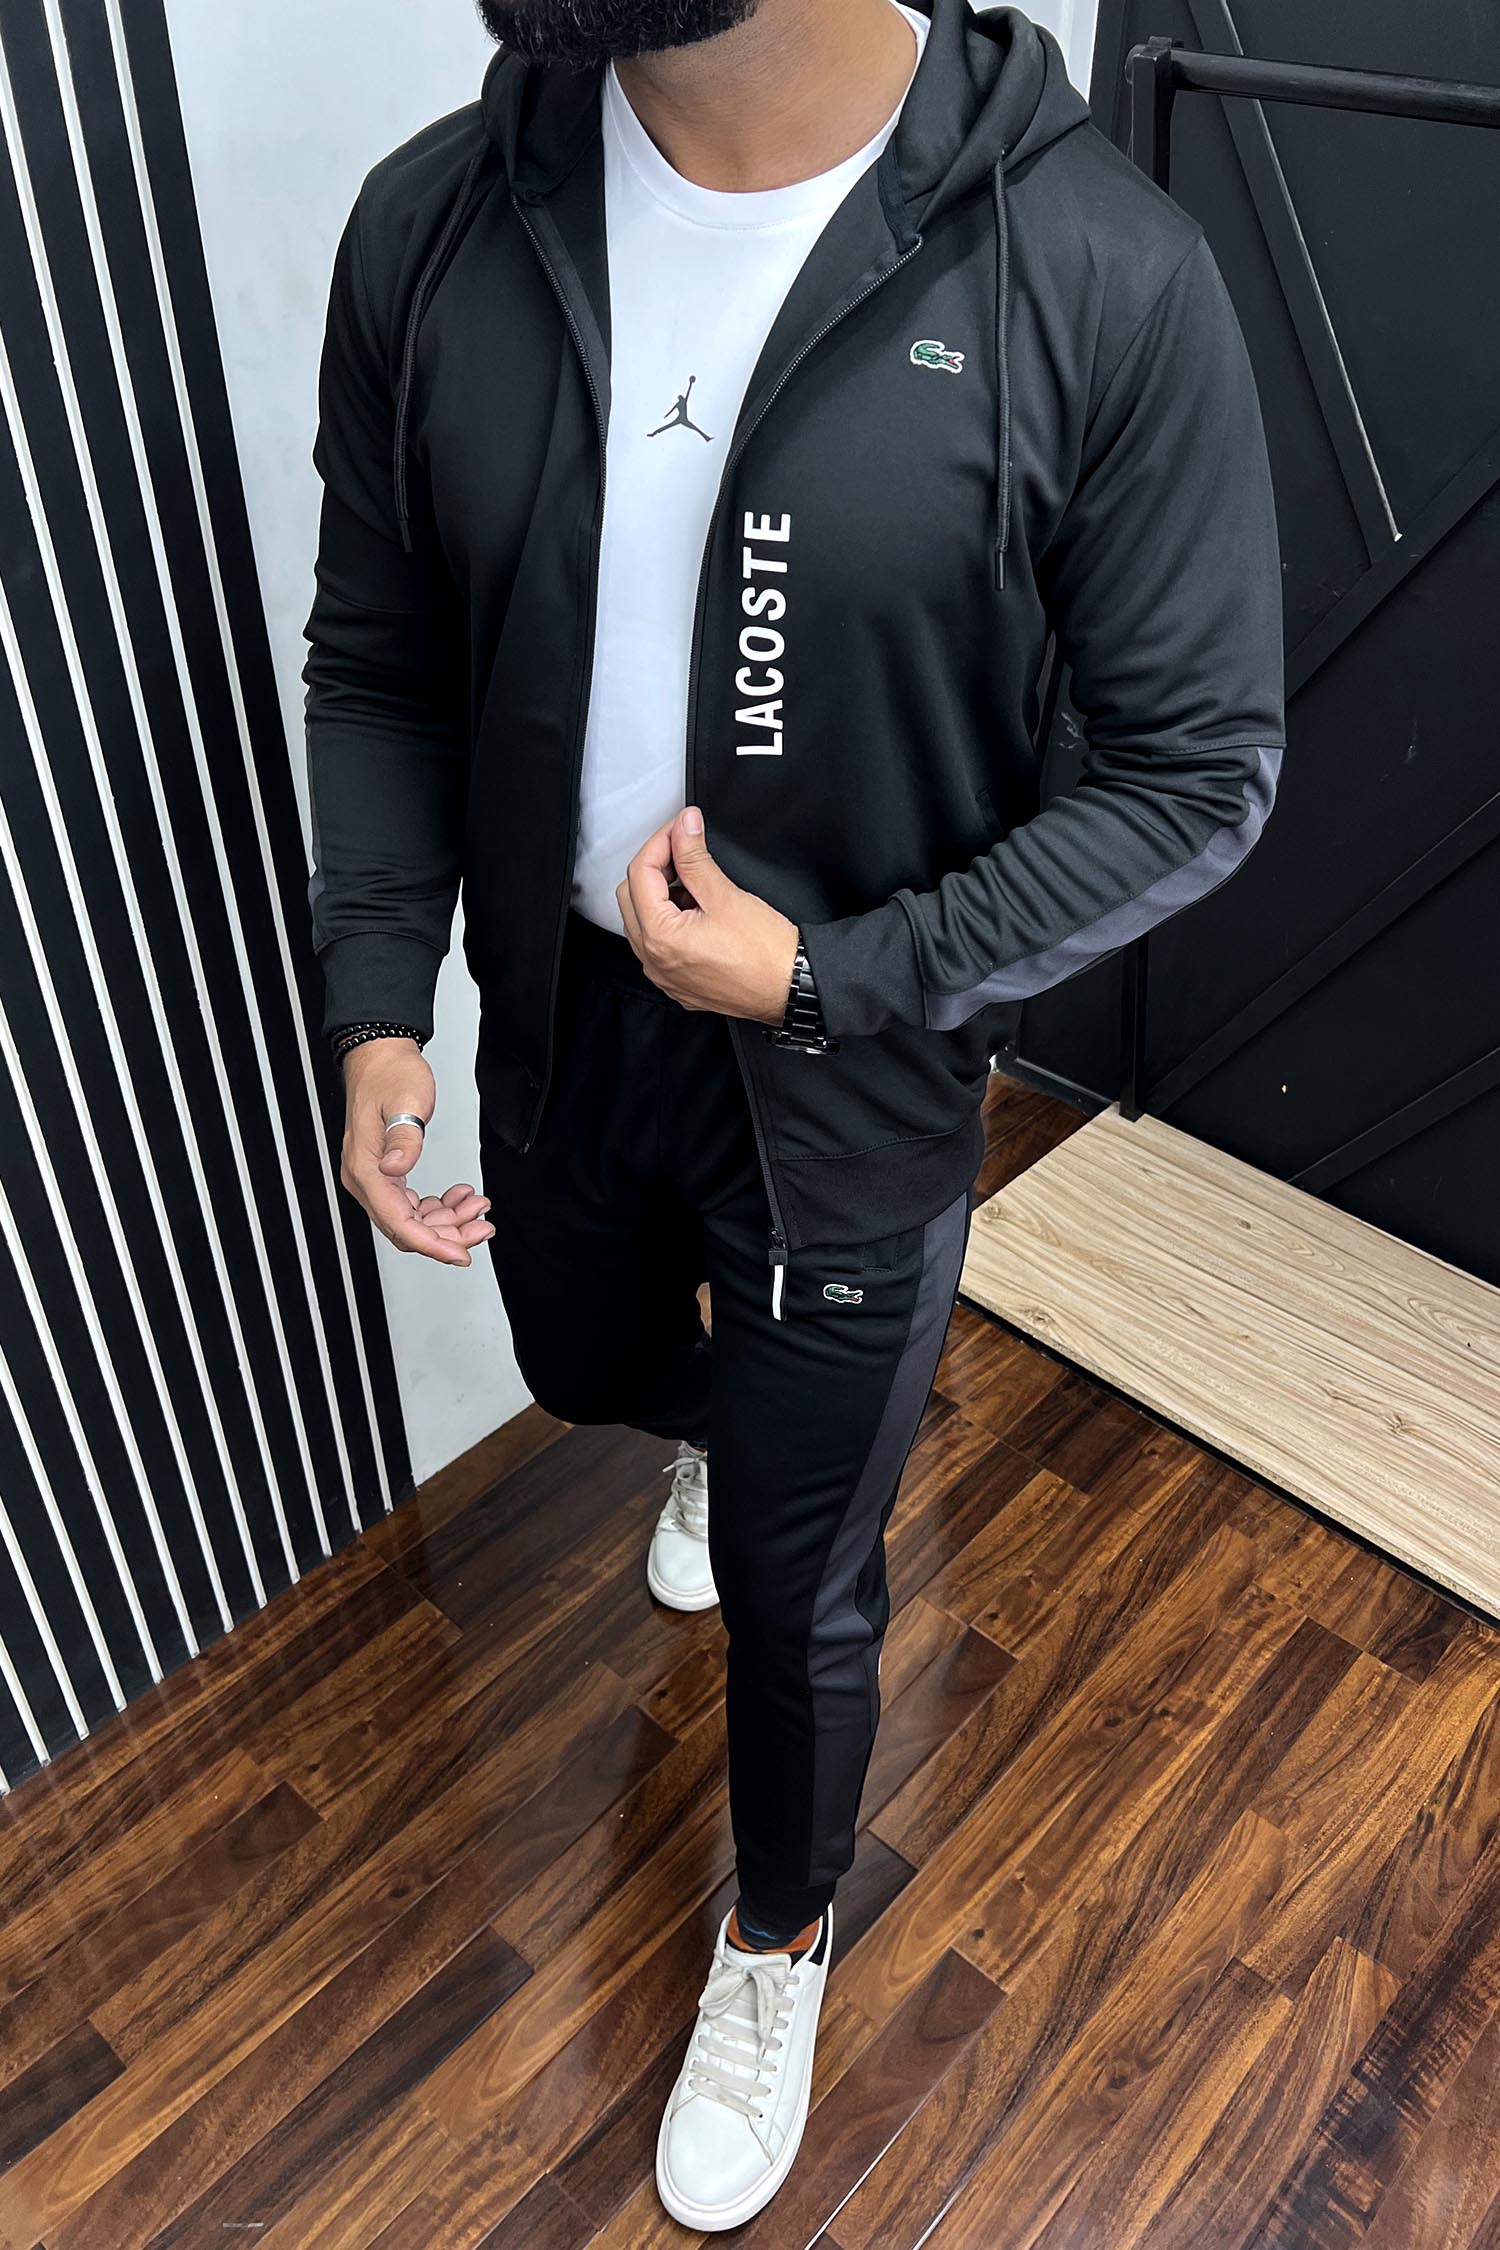 Lcaste Embroidered Logo Tracksuit In Black